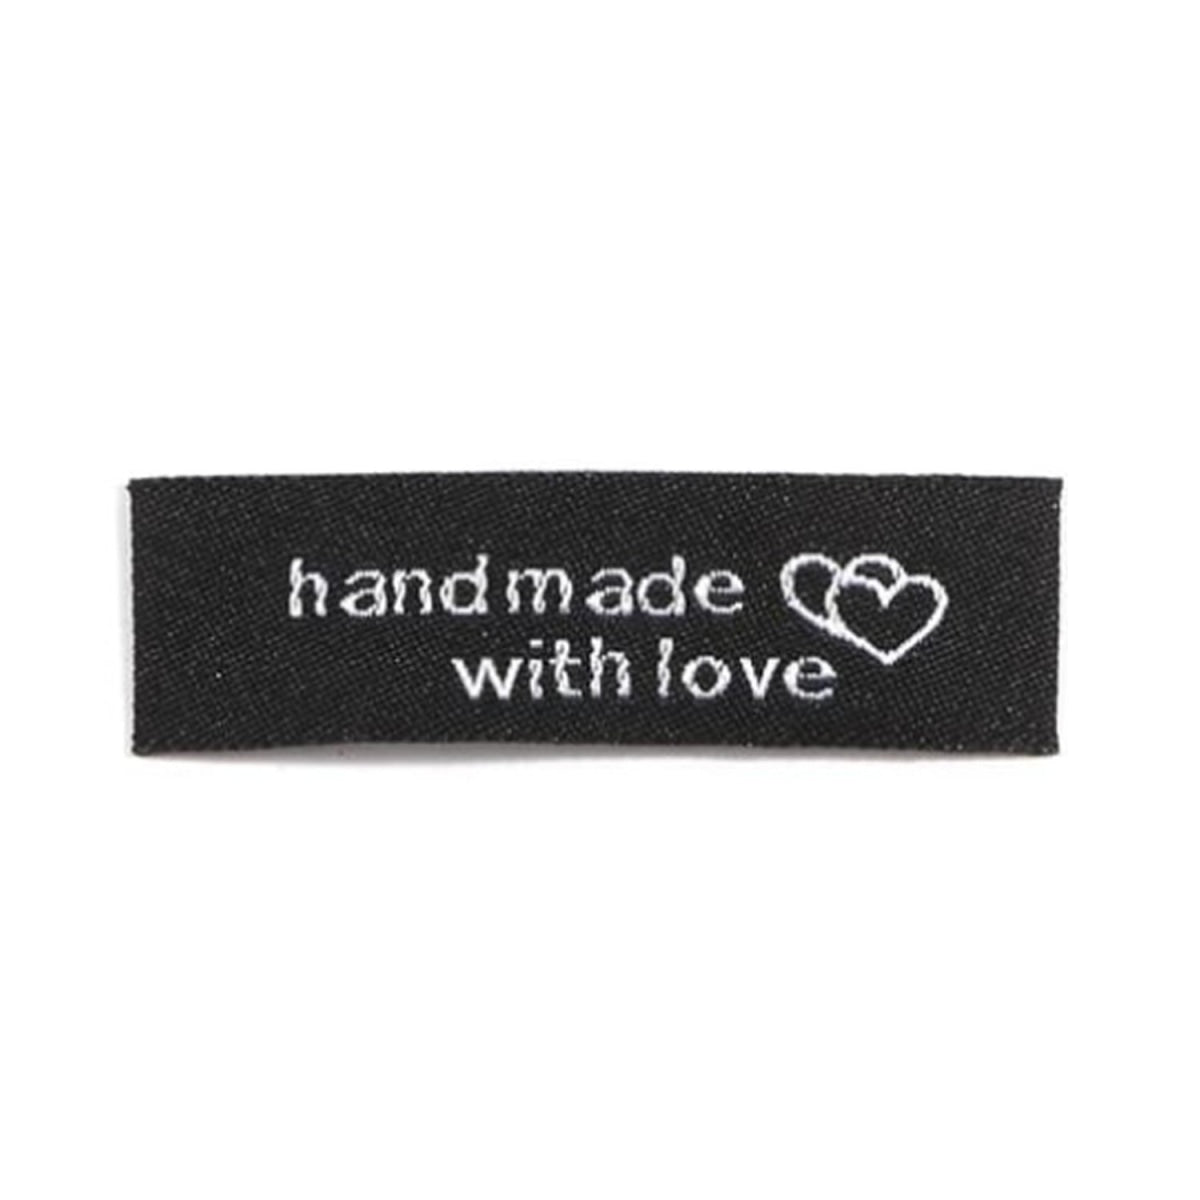 20pcs Sewing Tags Clothing Labels Cloth Fabric "Handmade with Love" Bags DIY - Black - - Asia Sell